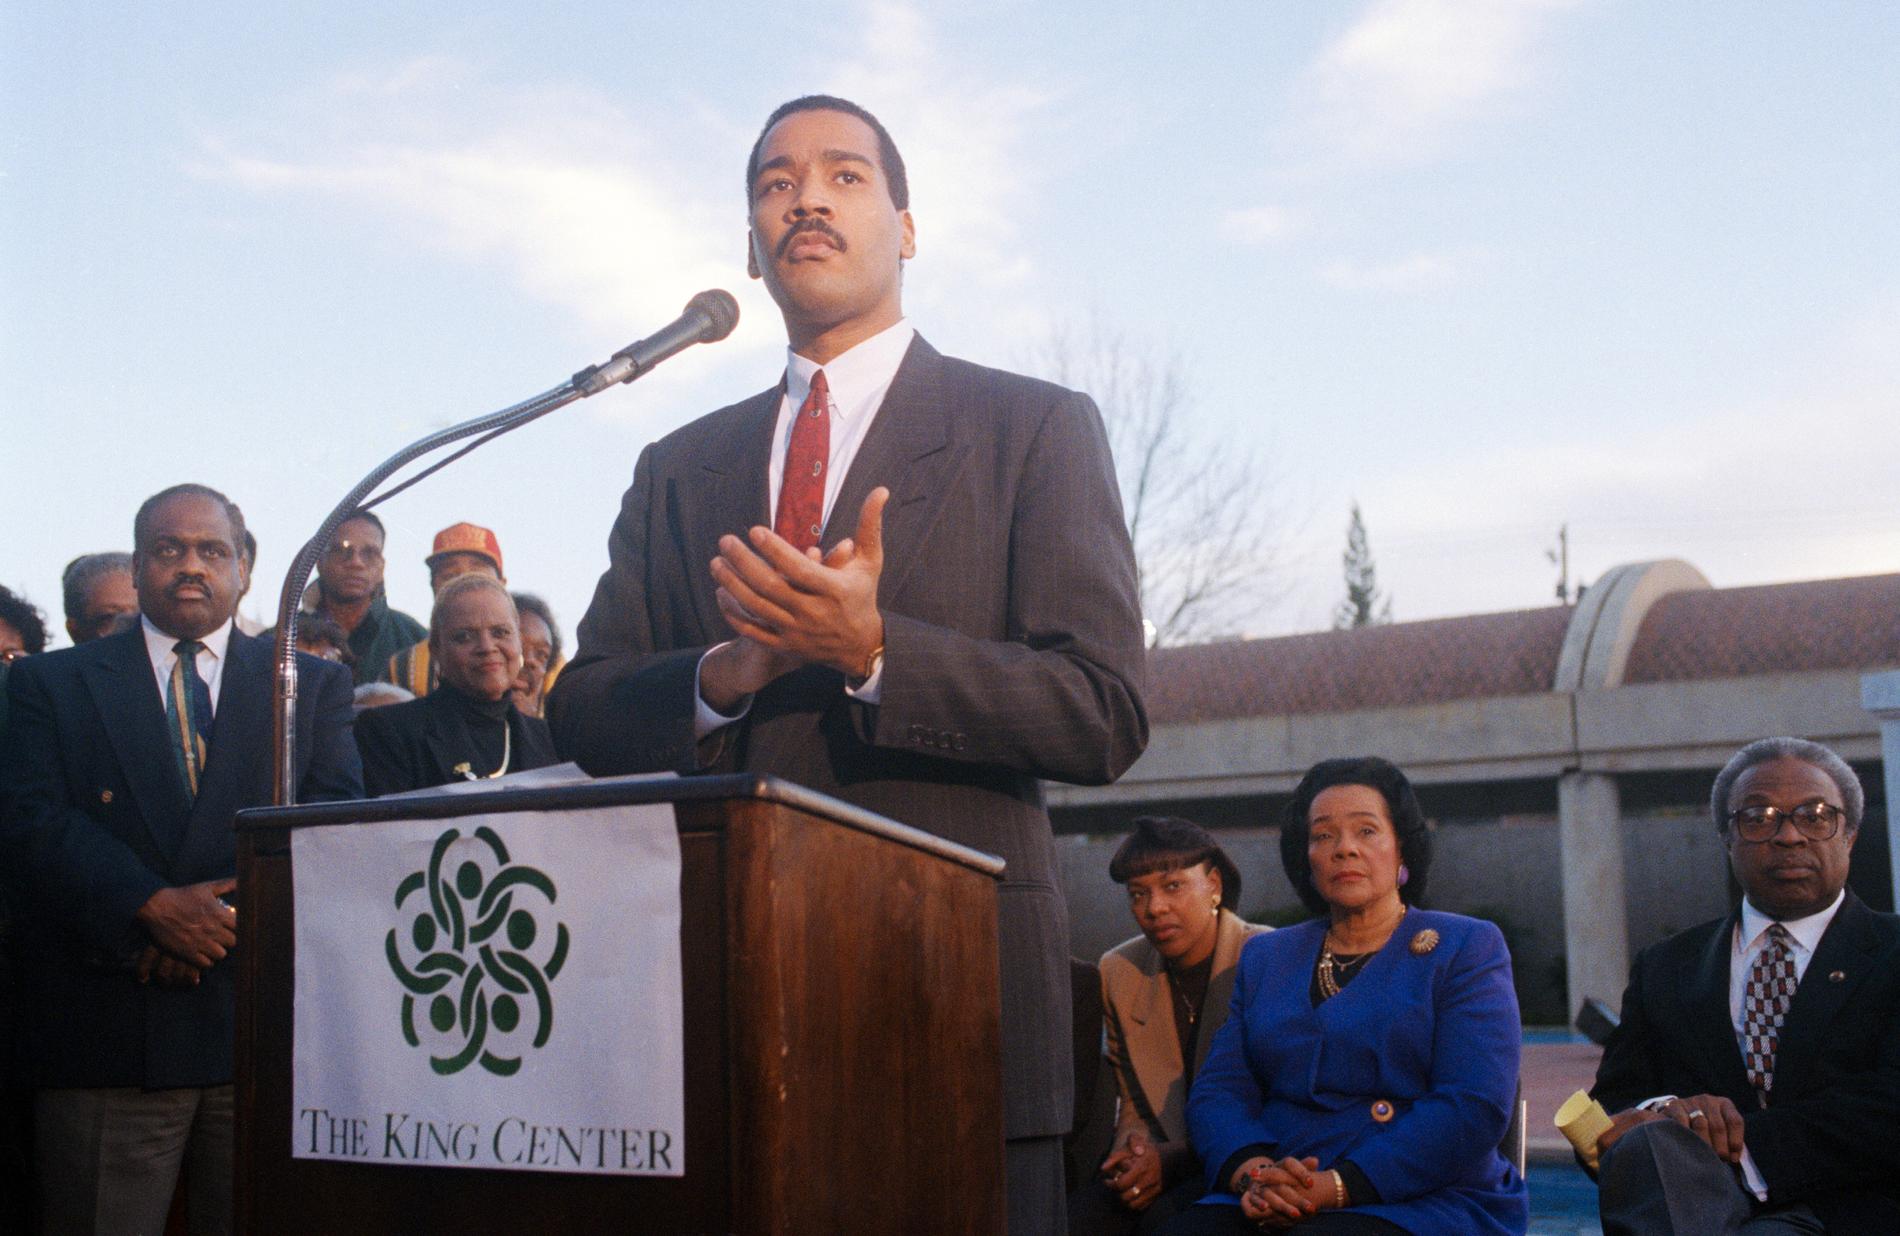 Dexter Scott King, Son of Martin Luther King Jr., Dies at 62 from Prostate Cancer